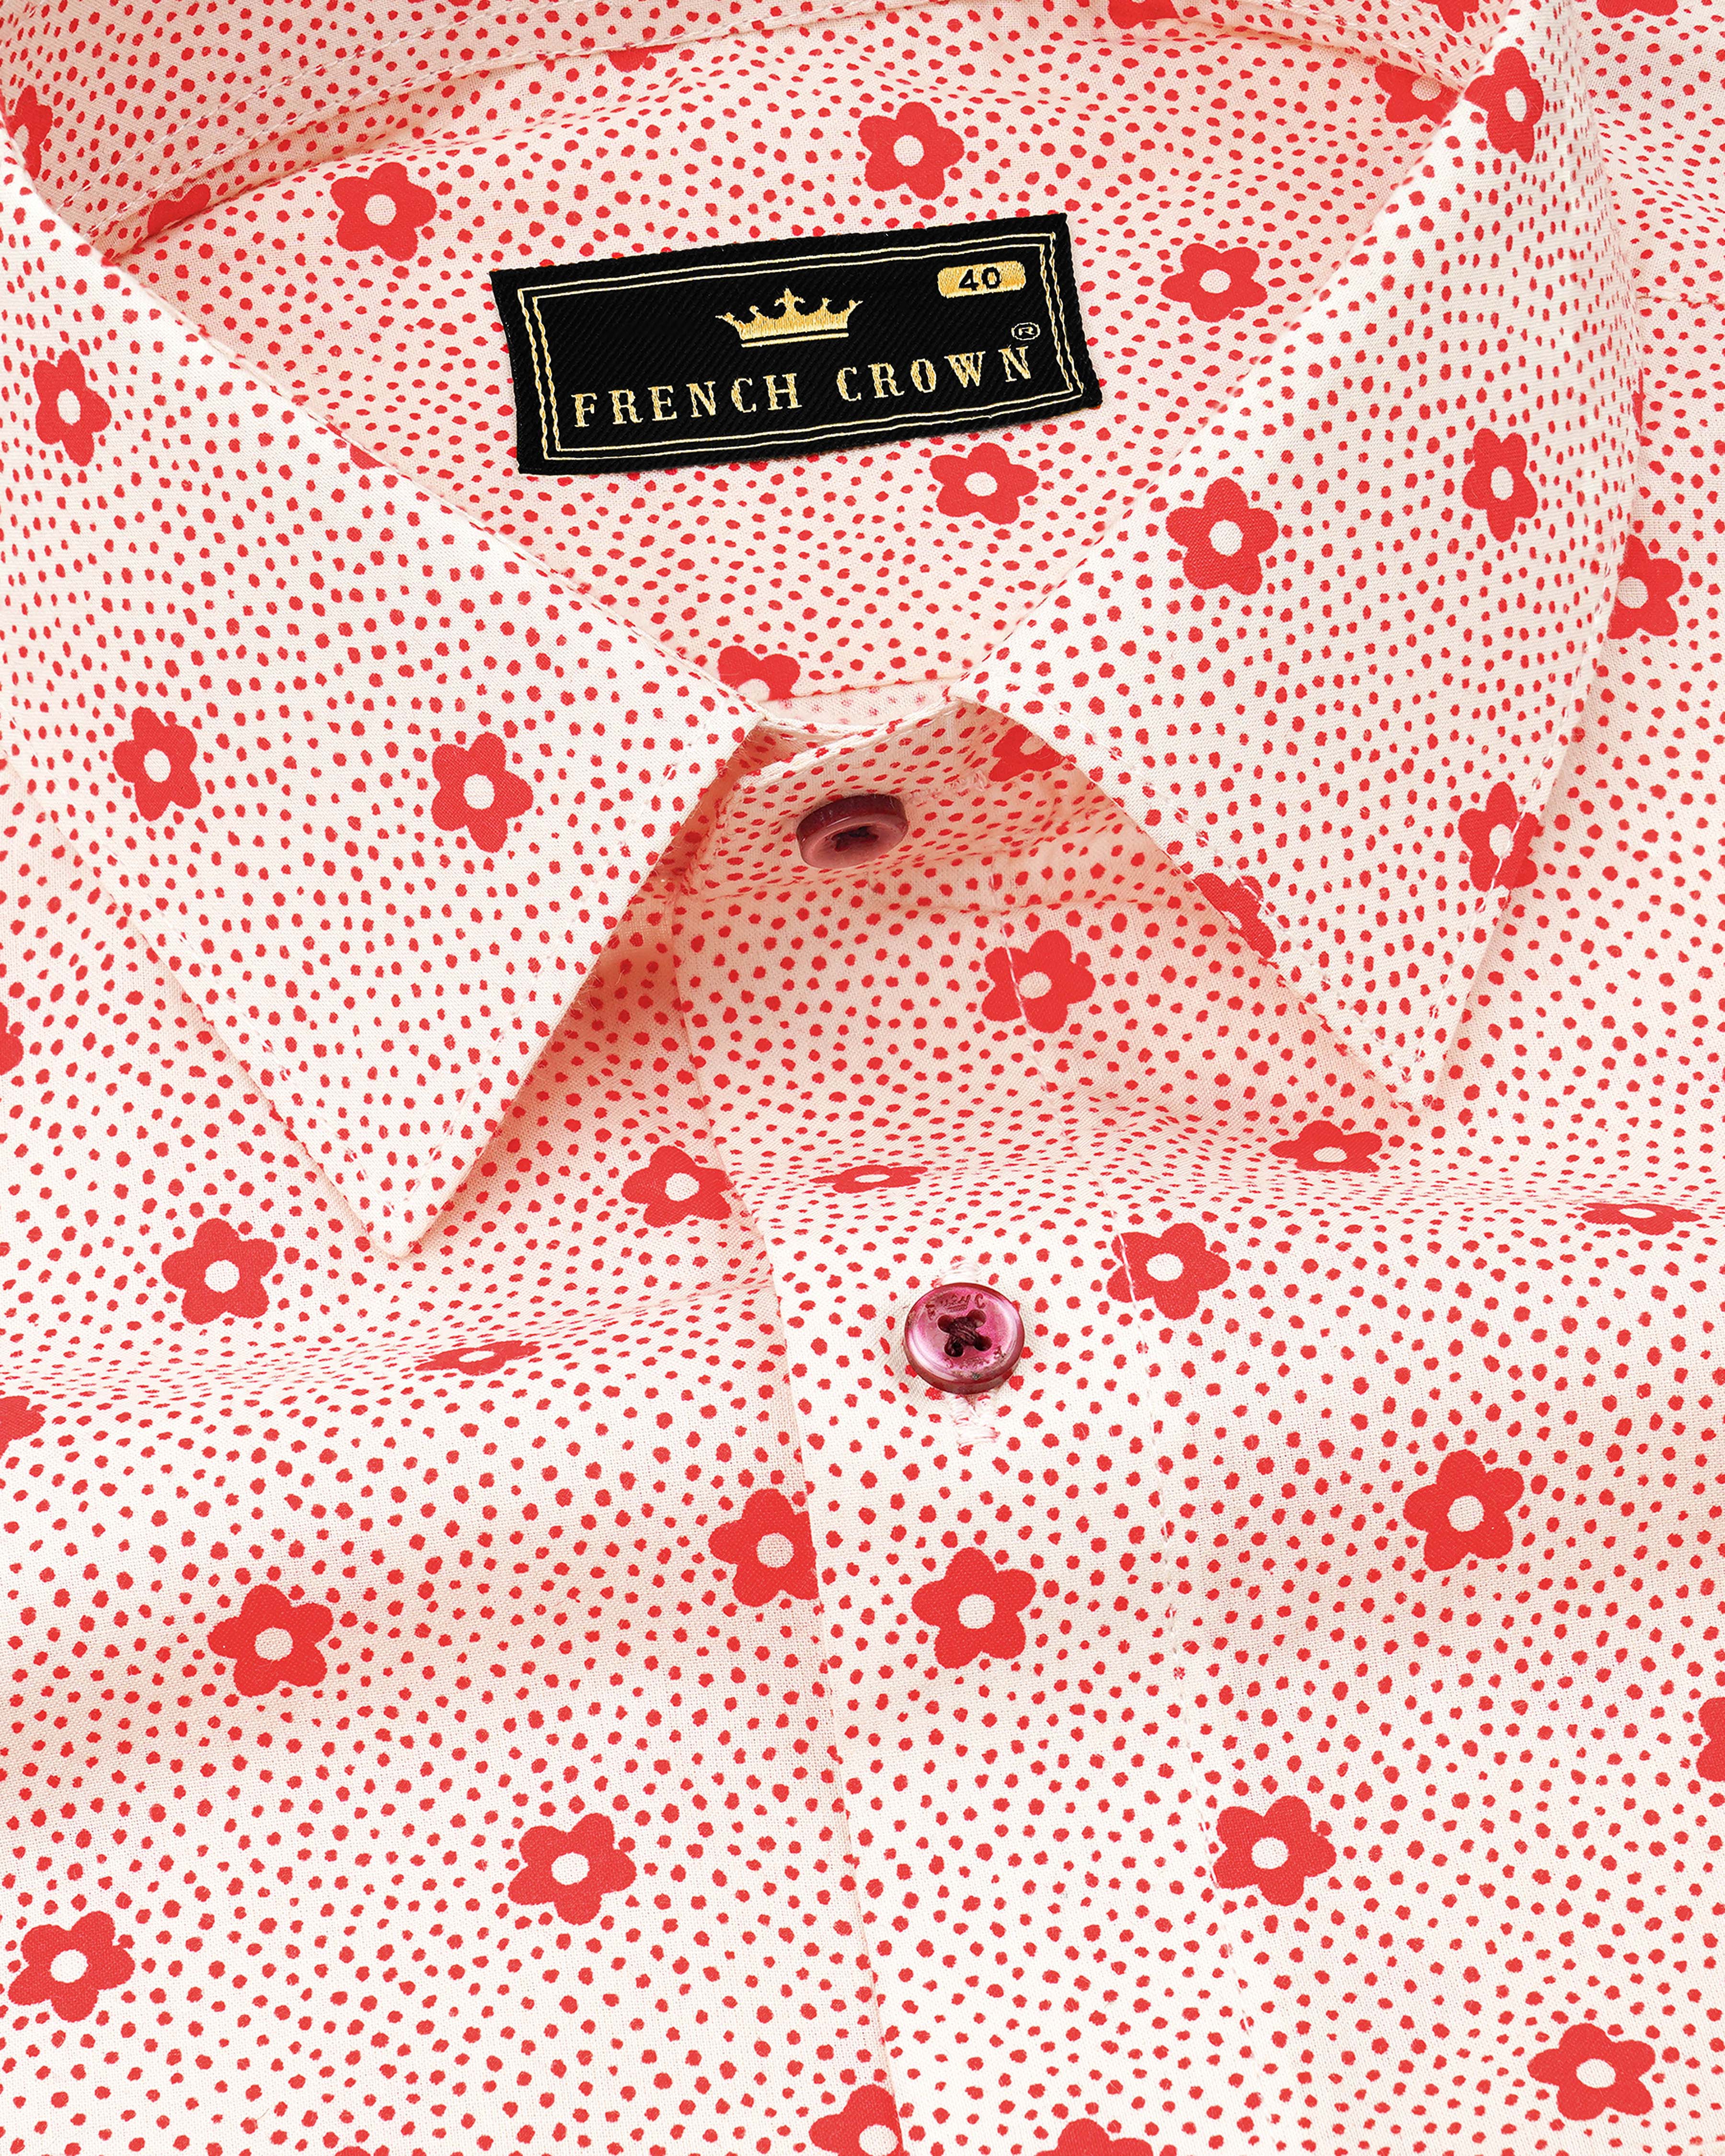 Albescent Peach with Jasper Red Ditsy Printed Printed Premium Cotton Shirt 8255-MN-38, 8255-MN-H-38, 8255-MN-39, 8255-MN-H-39, 8255-MN-40, 8255-MN-H-40, 8255-MN-42, 8255-MN-H-42, 8255-MN-44, 8255-MN-H-44, 8255-MN-46, 8255-MN-H-46, 8255-MN-48, 8255-MN-H-48, 8255-MN-50, 8255-MN-H-50, 8255-MN-52, 8255-MN-H-52